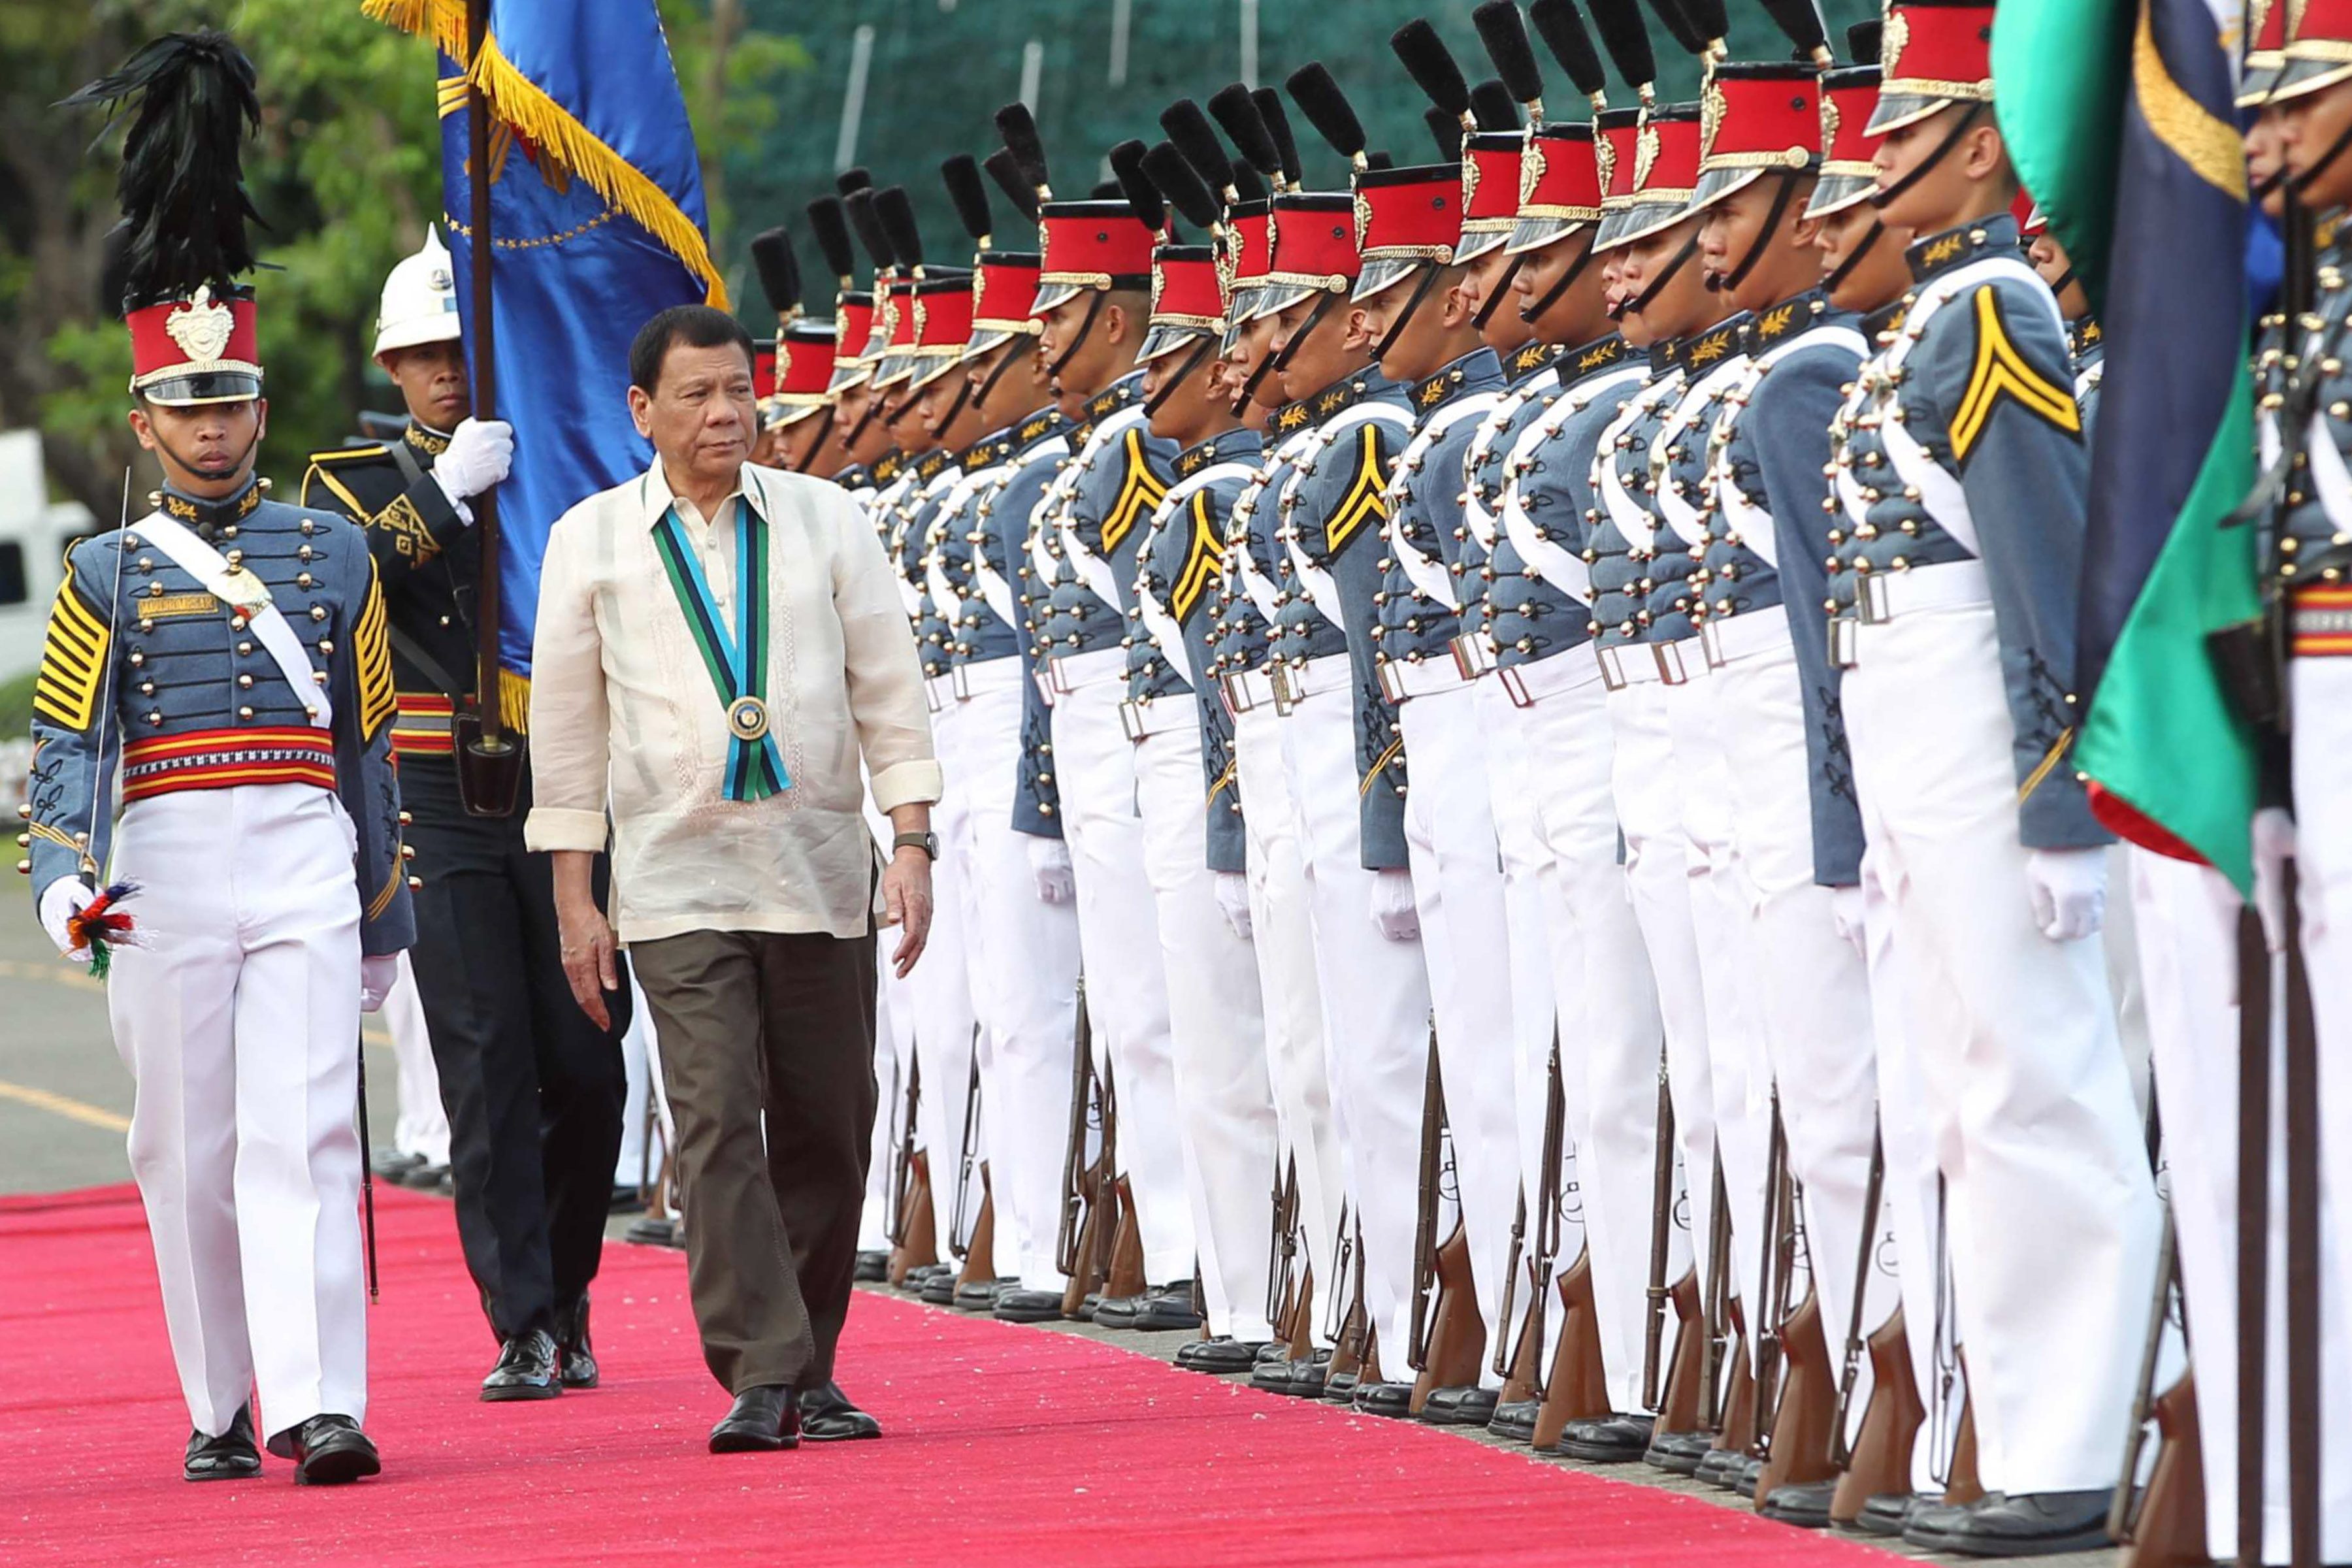 HONOR GUARDS. Students of the Philippine Military Academy (PMA) served as honor guards during the 81st anniversary celebration of the Armed Forces of the Philippines 